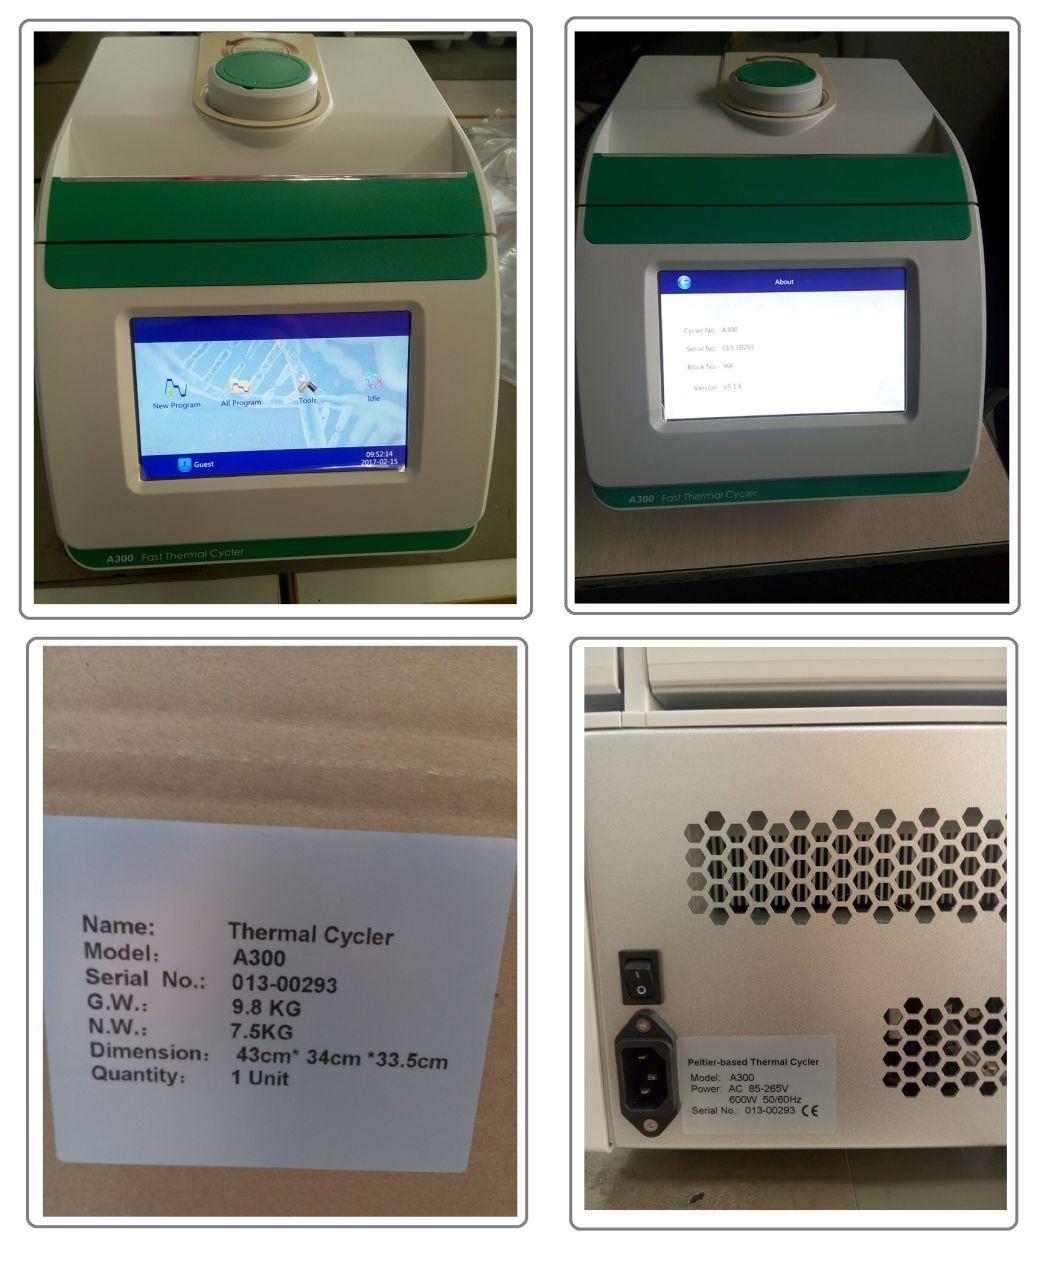 Medical Hospital Lab Equipment A300 PCR Machine Fast Testing Real Time Thermal Cycler Gradient Touch Screen Fast Peliter-Based Thermal Cycler for DNA Testing